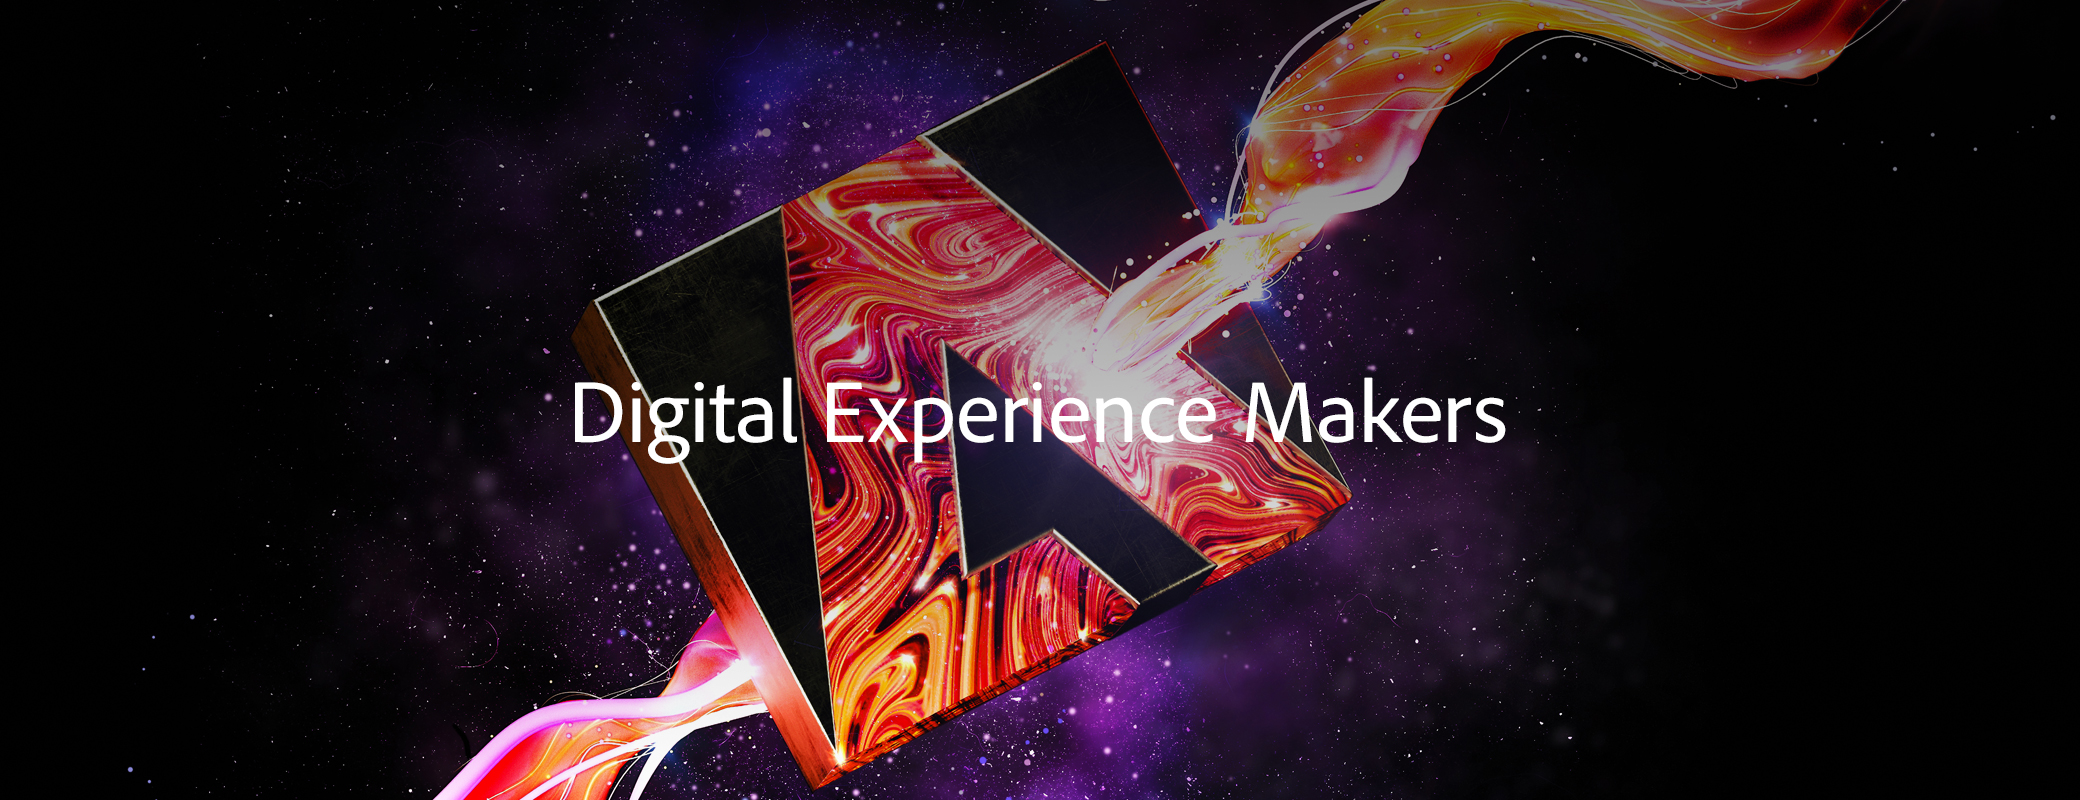 Adobe presents the Digital Experience Makers